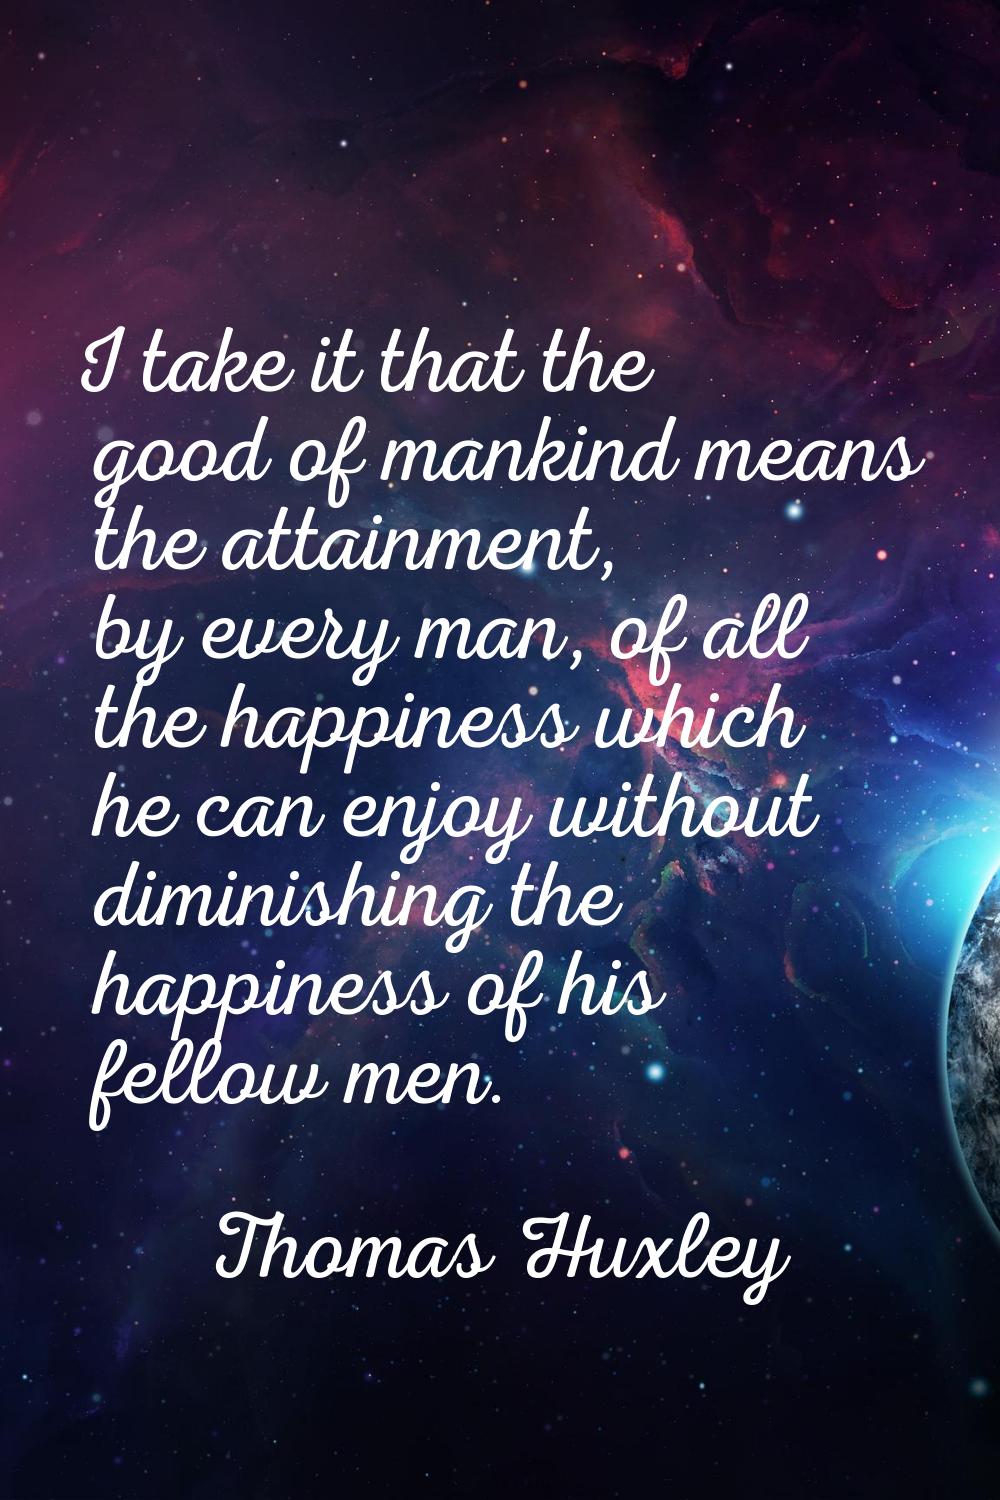 I take it that the good of mankind means the attainment, by every man, of all the happiness which h